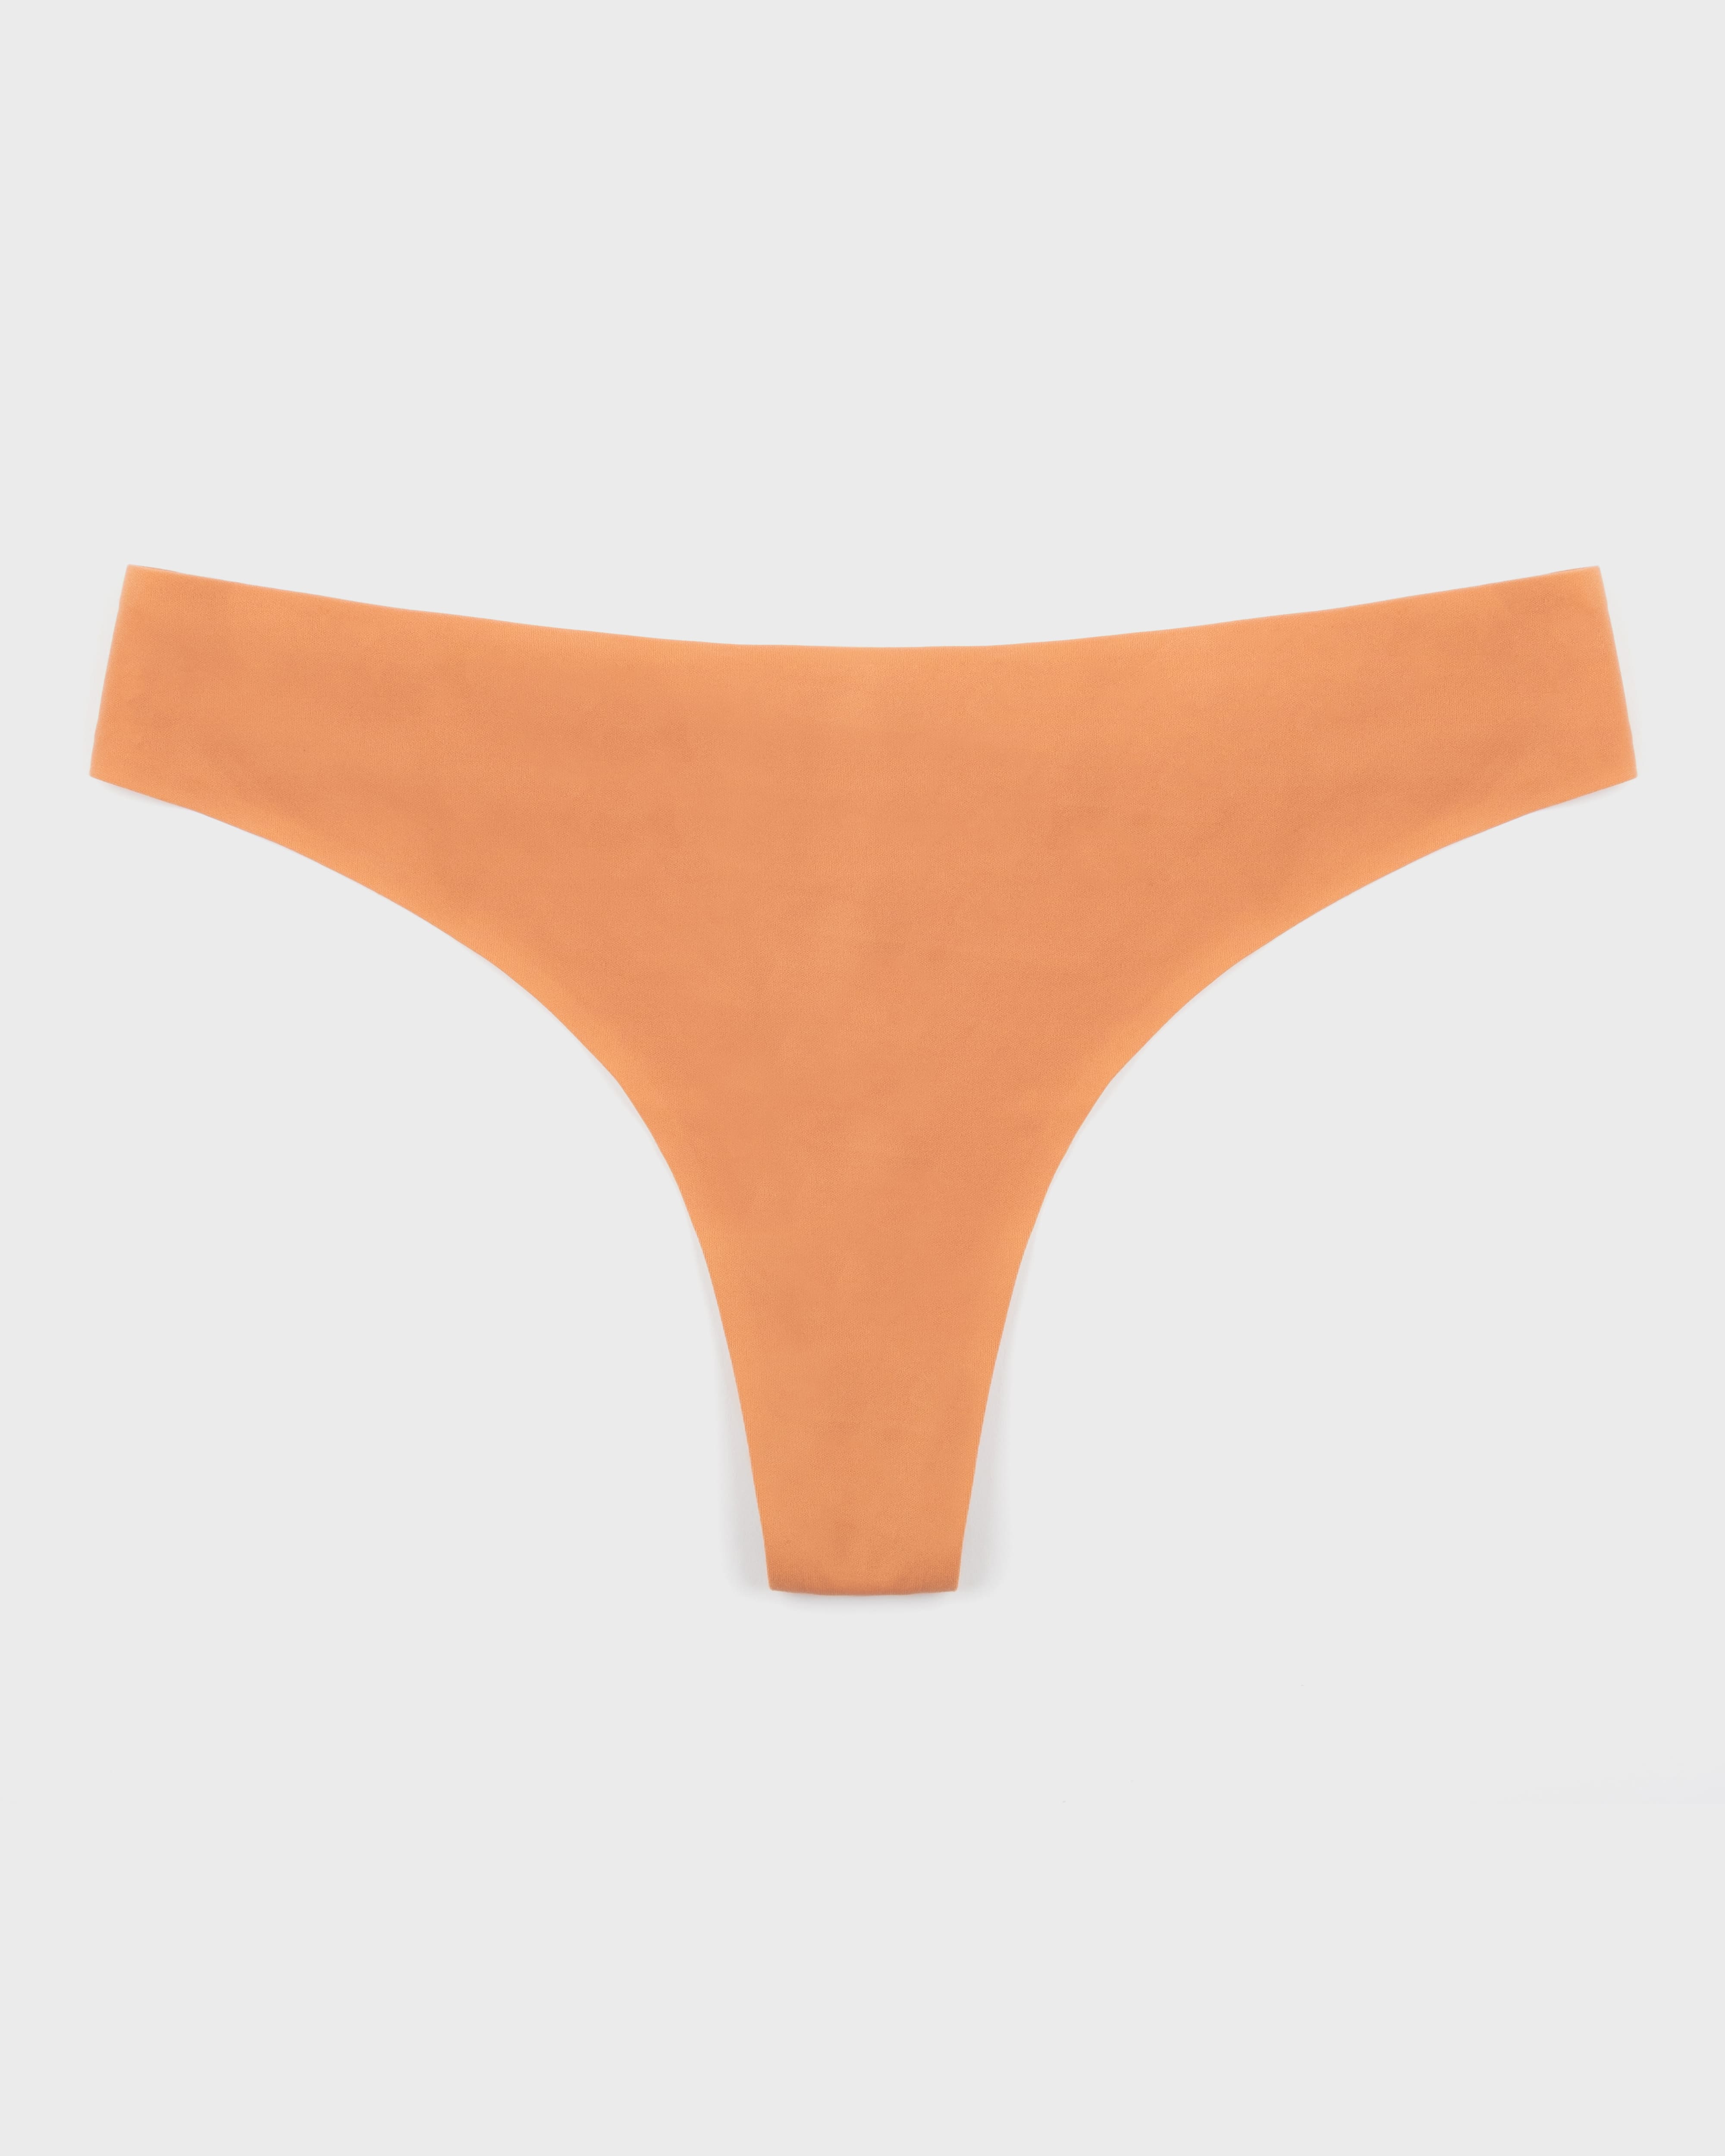 The Easy Everyday Seamless Thong